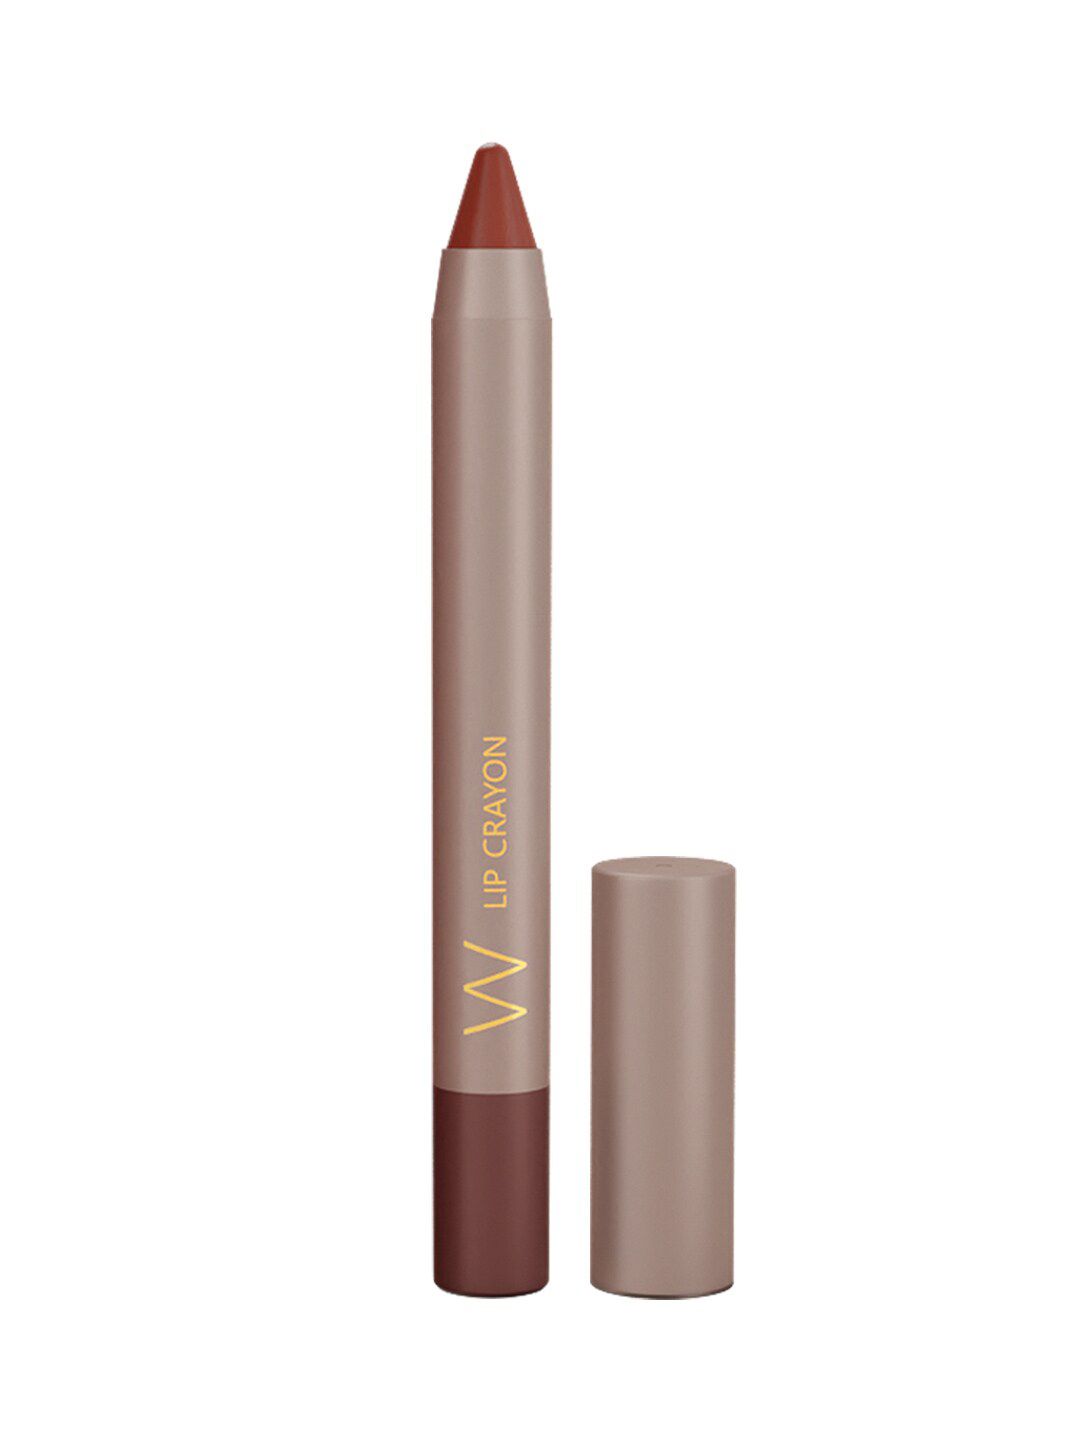 W Lip Crayon - Angelic Price in India